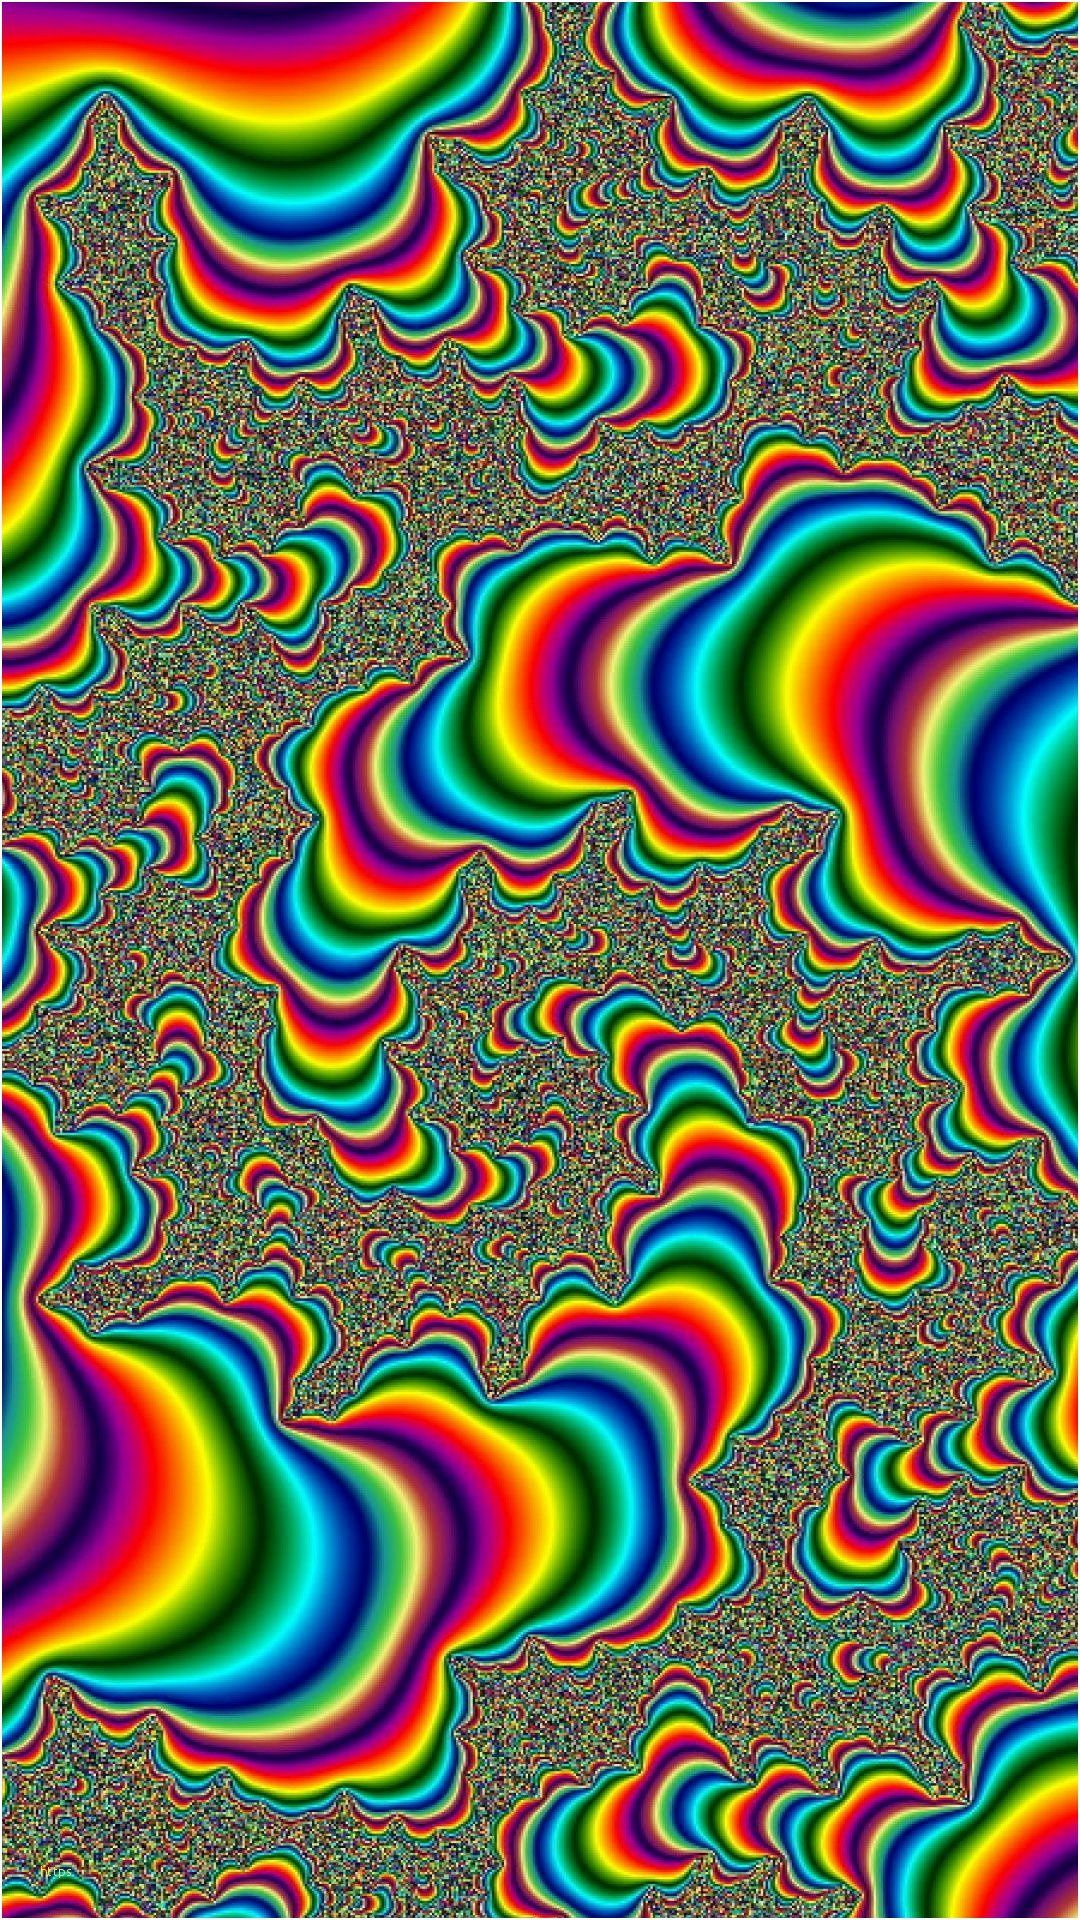 Trippy Psychedelic Wallpapers Iphone X